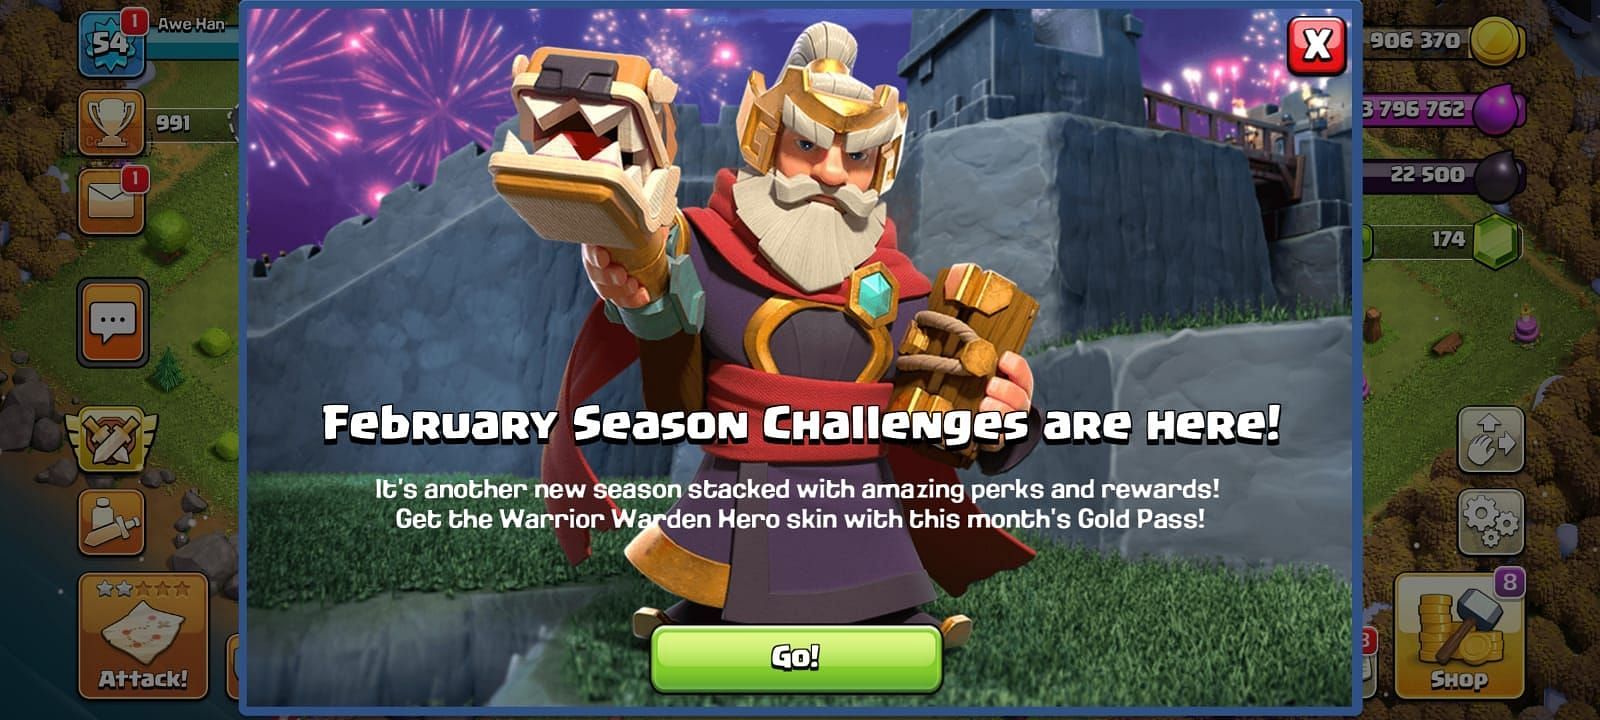 Clash of Clans February 2022 perks revealed